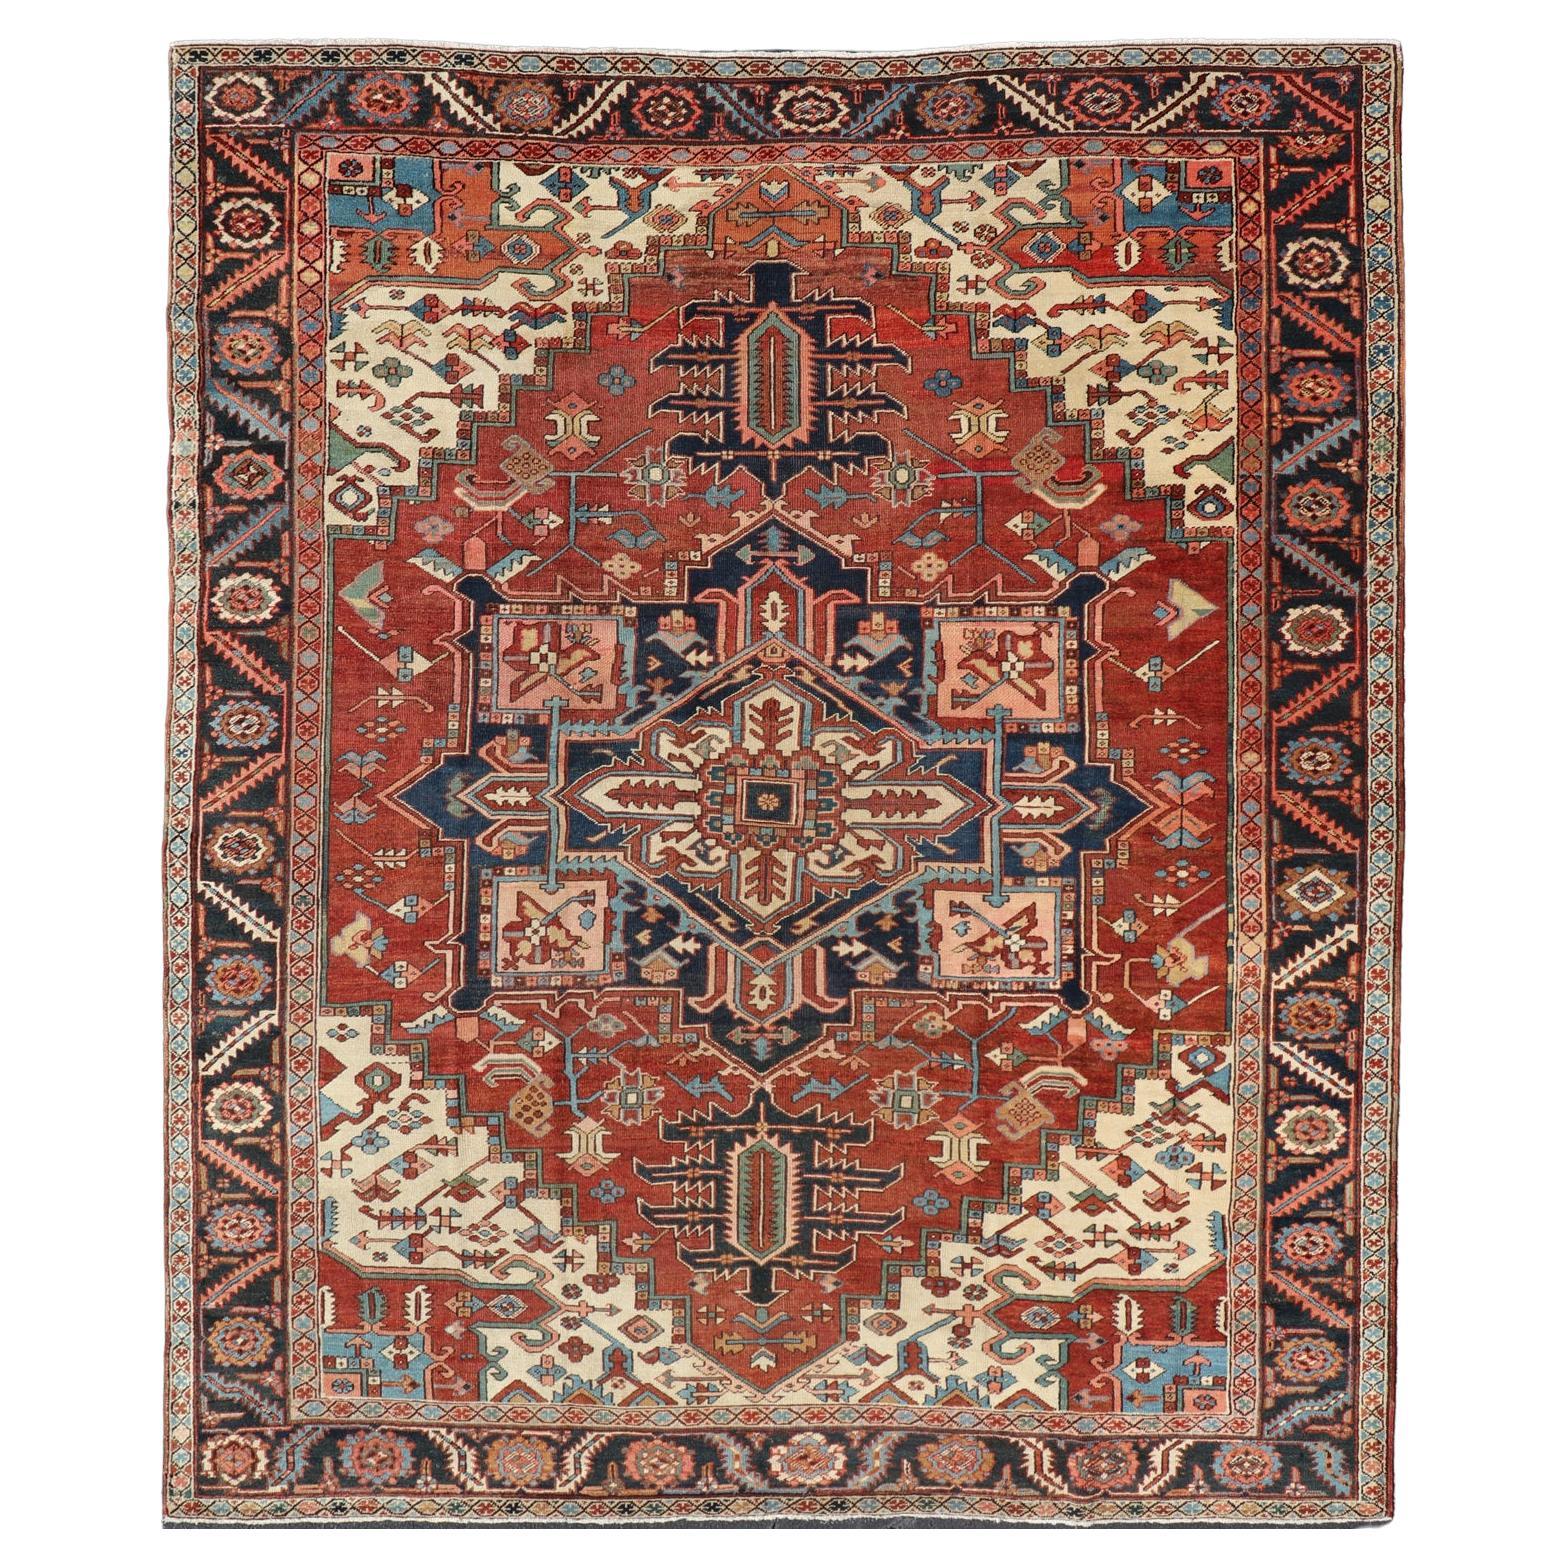 Early 20th Century Antique Persian Serapi Carpet with Stylized Geometric Motifs For Sale